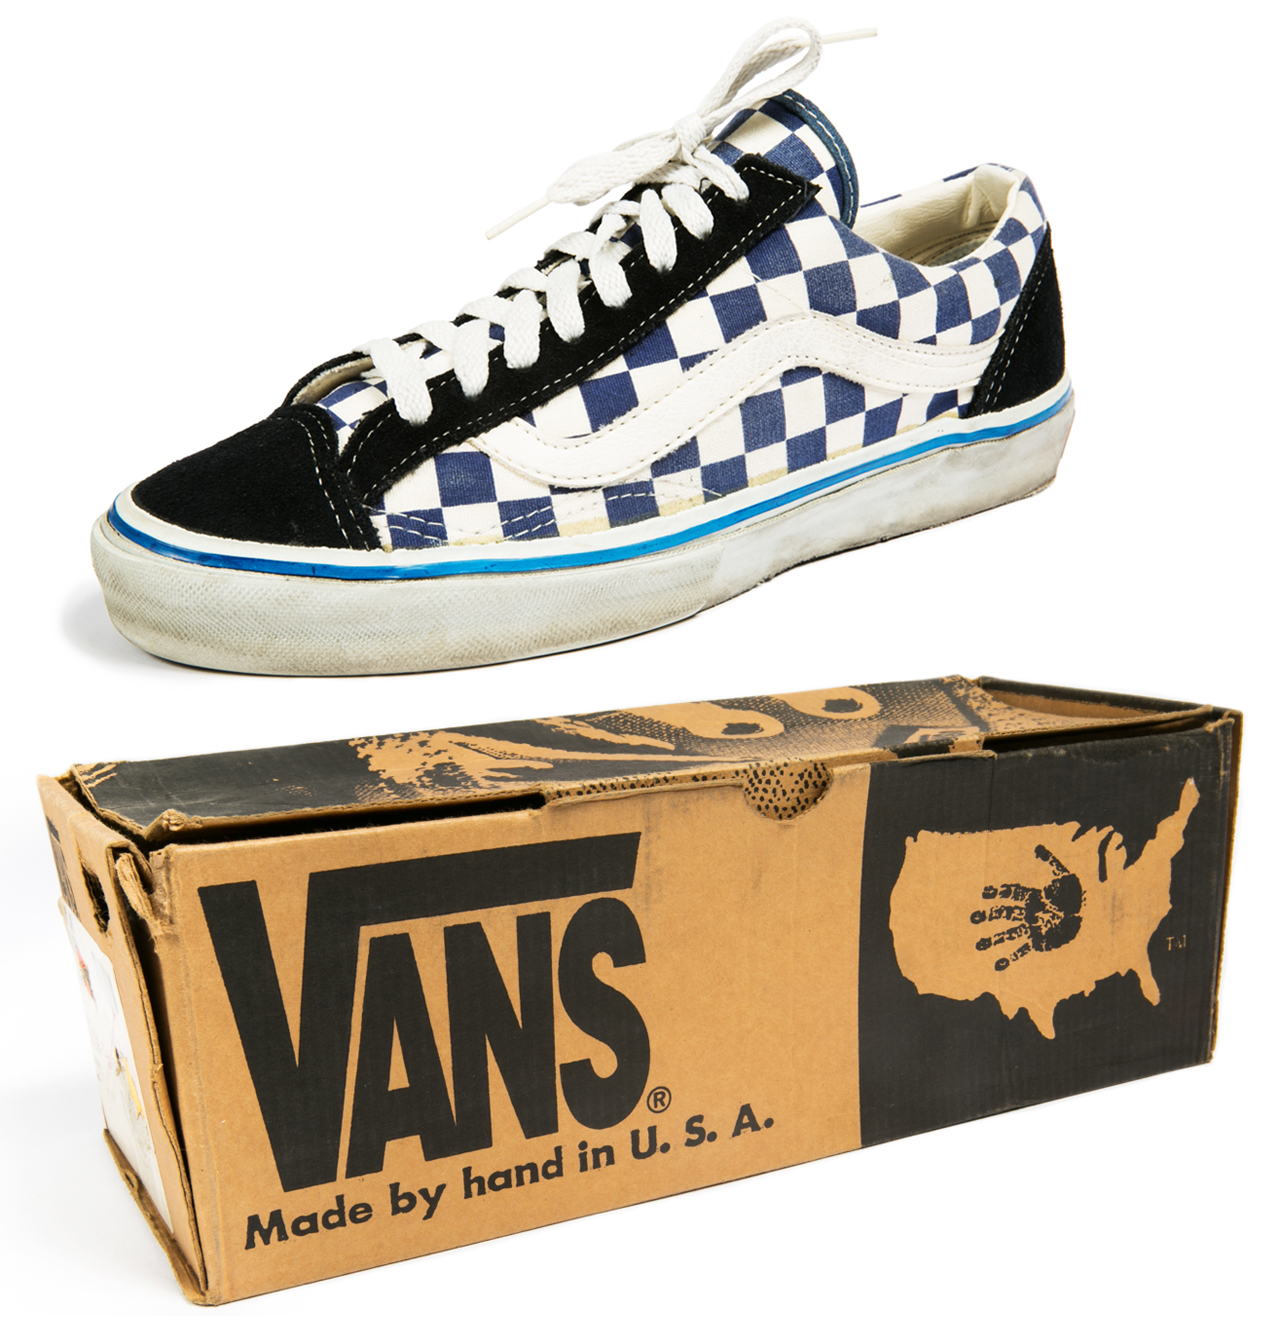 Vintage Old Skool shoe and Vans box. The Old Skool was the first skate shoe to incorporate leather and the famous Vans Sidestripe.